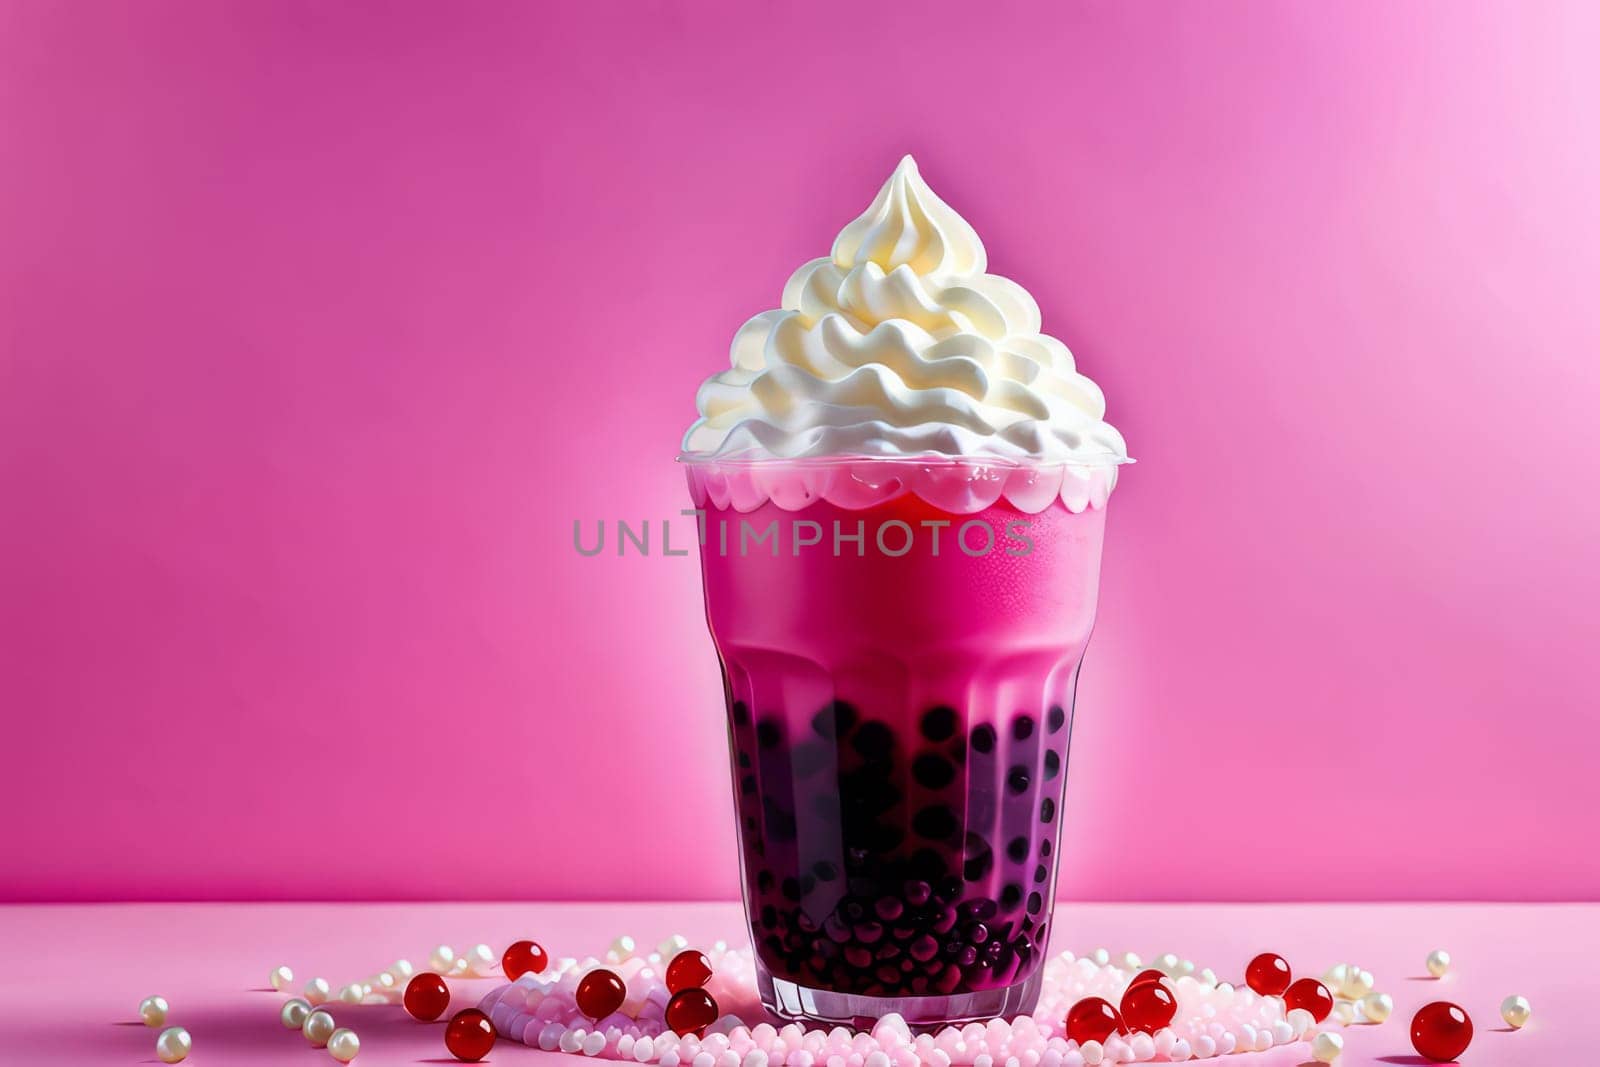 Colorful and joyful scene featuring a sweet pink bubble tea with whipped cream and tapioca pearls